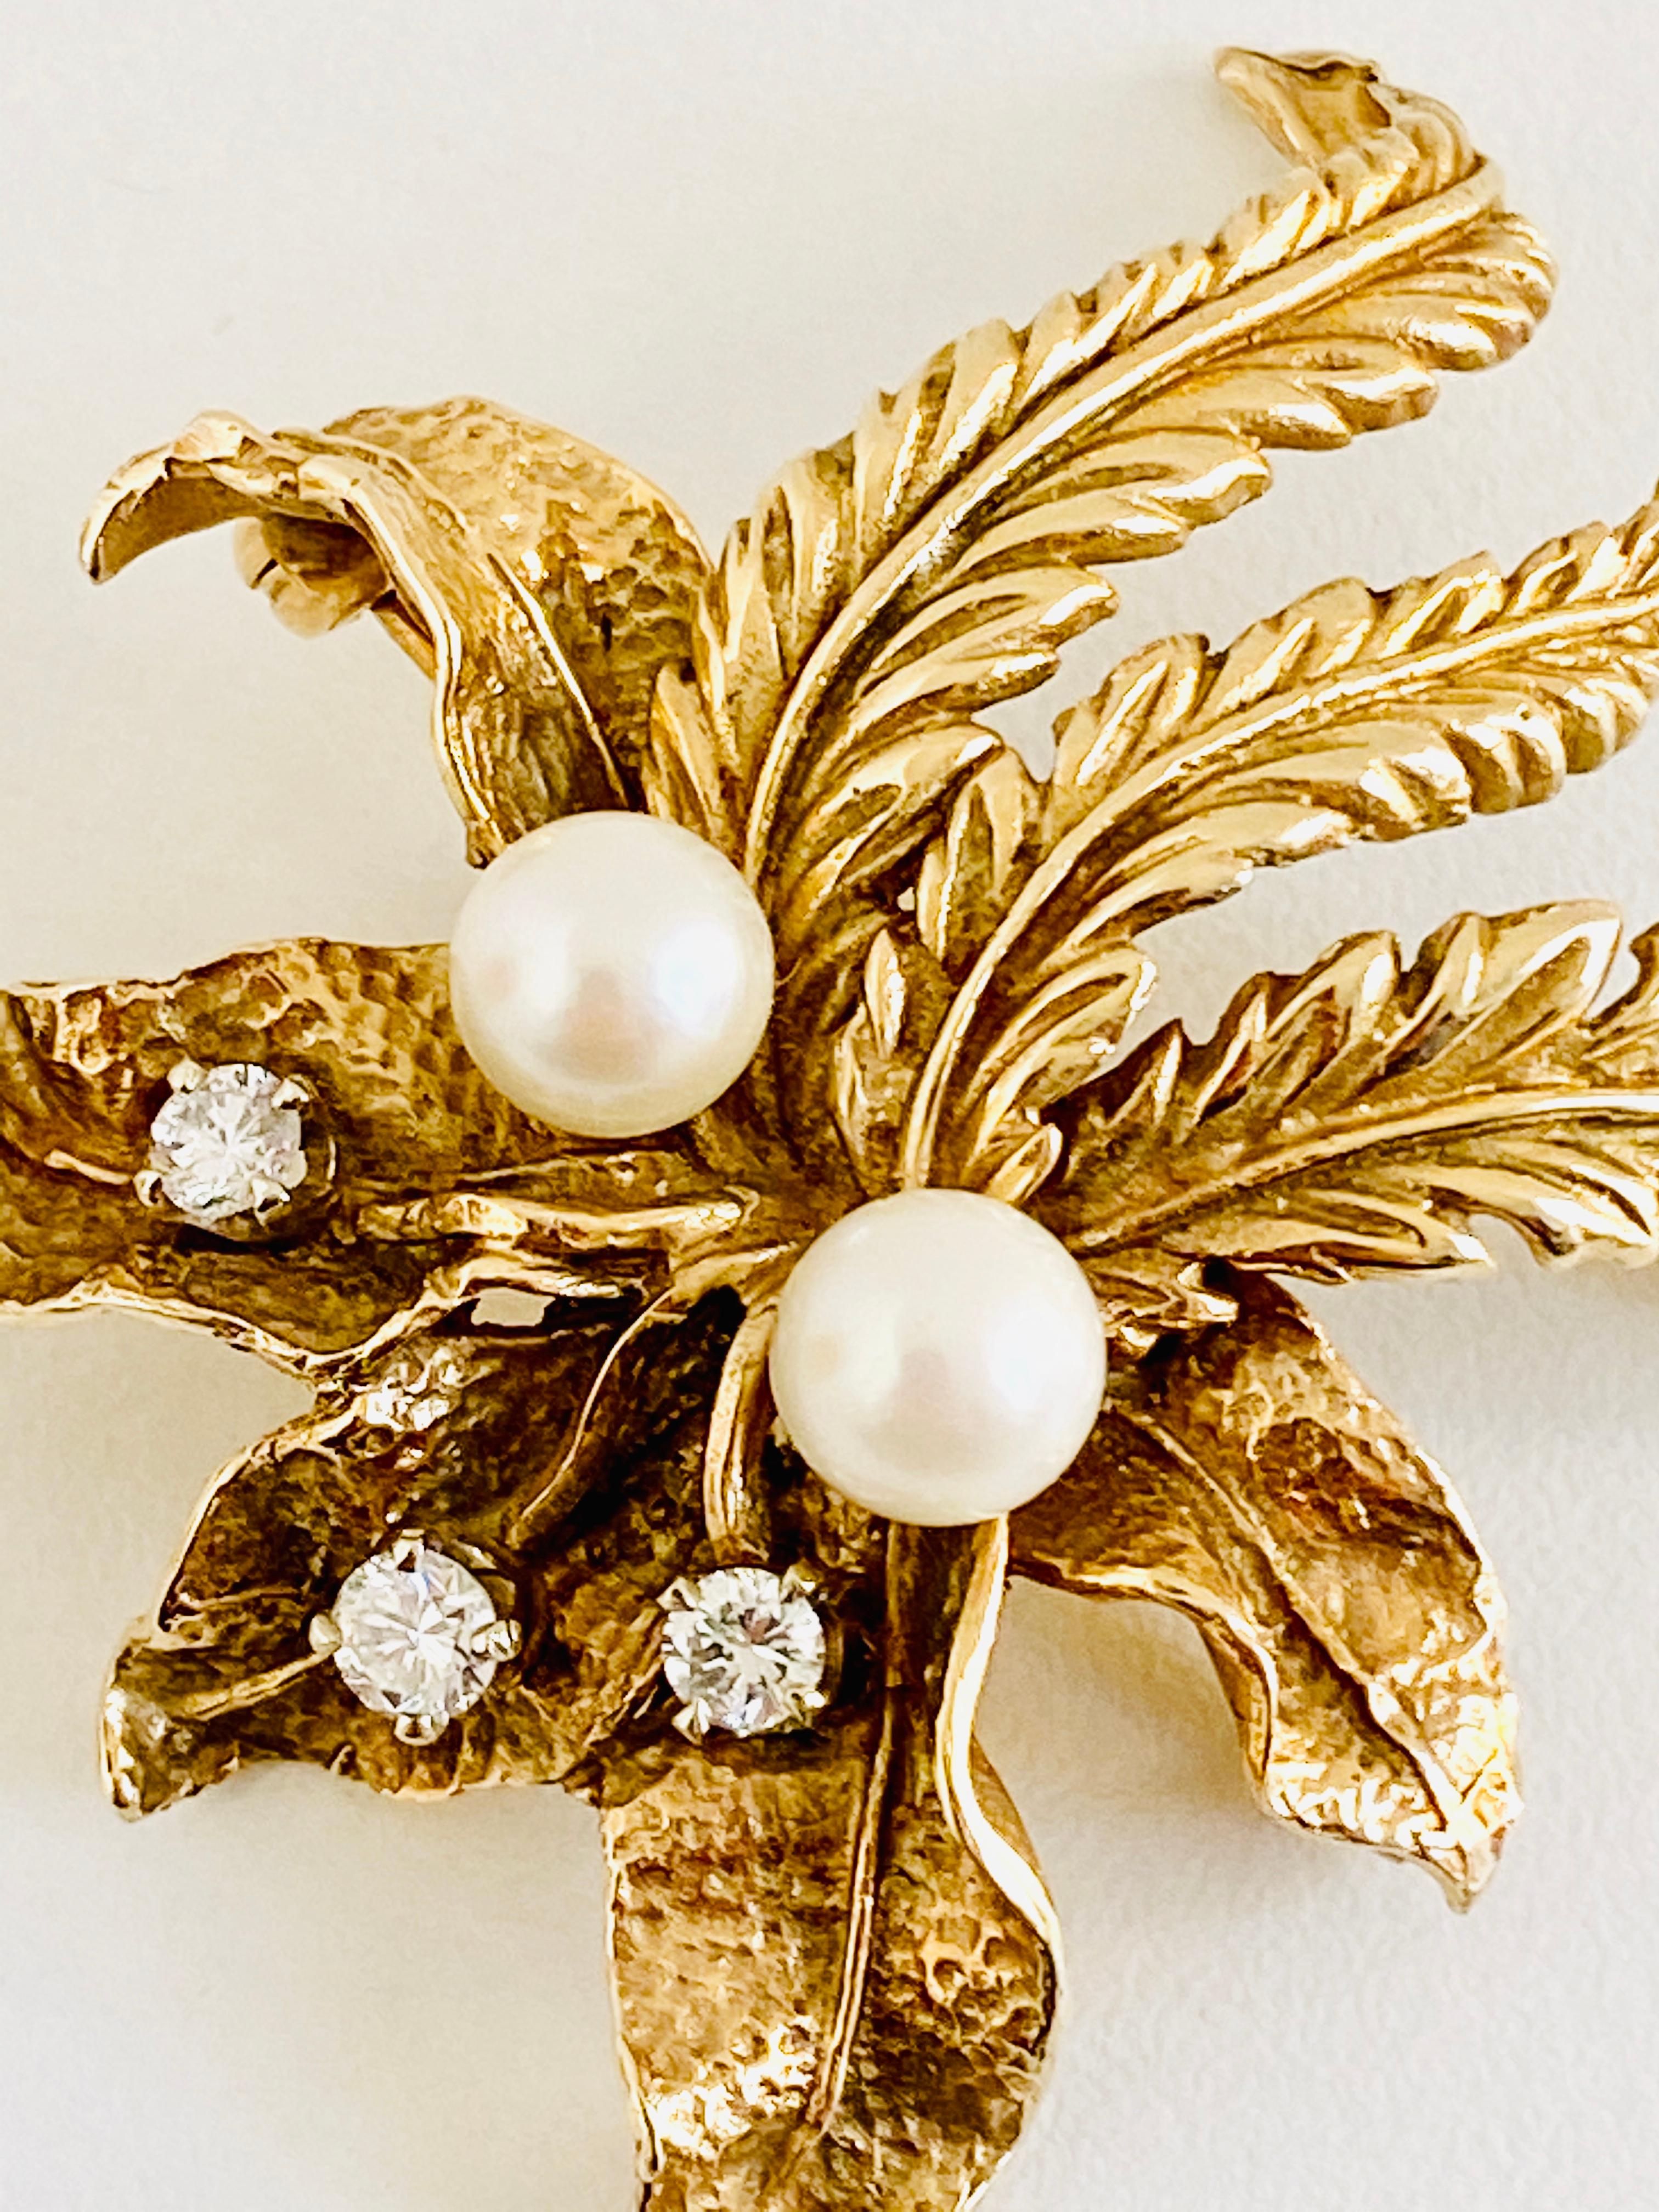 Elegant brooch from the 1960's featuring 3 round brilliant cut diamonds, approximately .34ct total weight and 2 beautiful cultured pearls. Set in 14k yellow gold. 

Size: 1-7/8” tall X 1-1/2